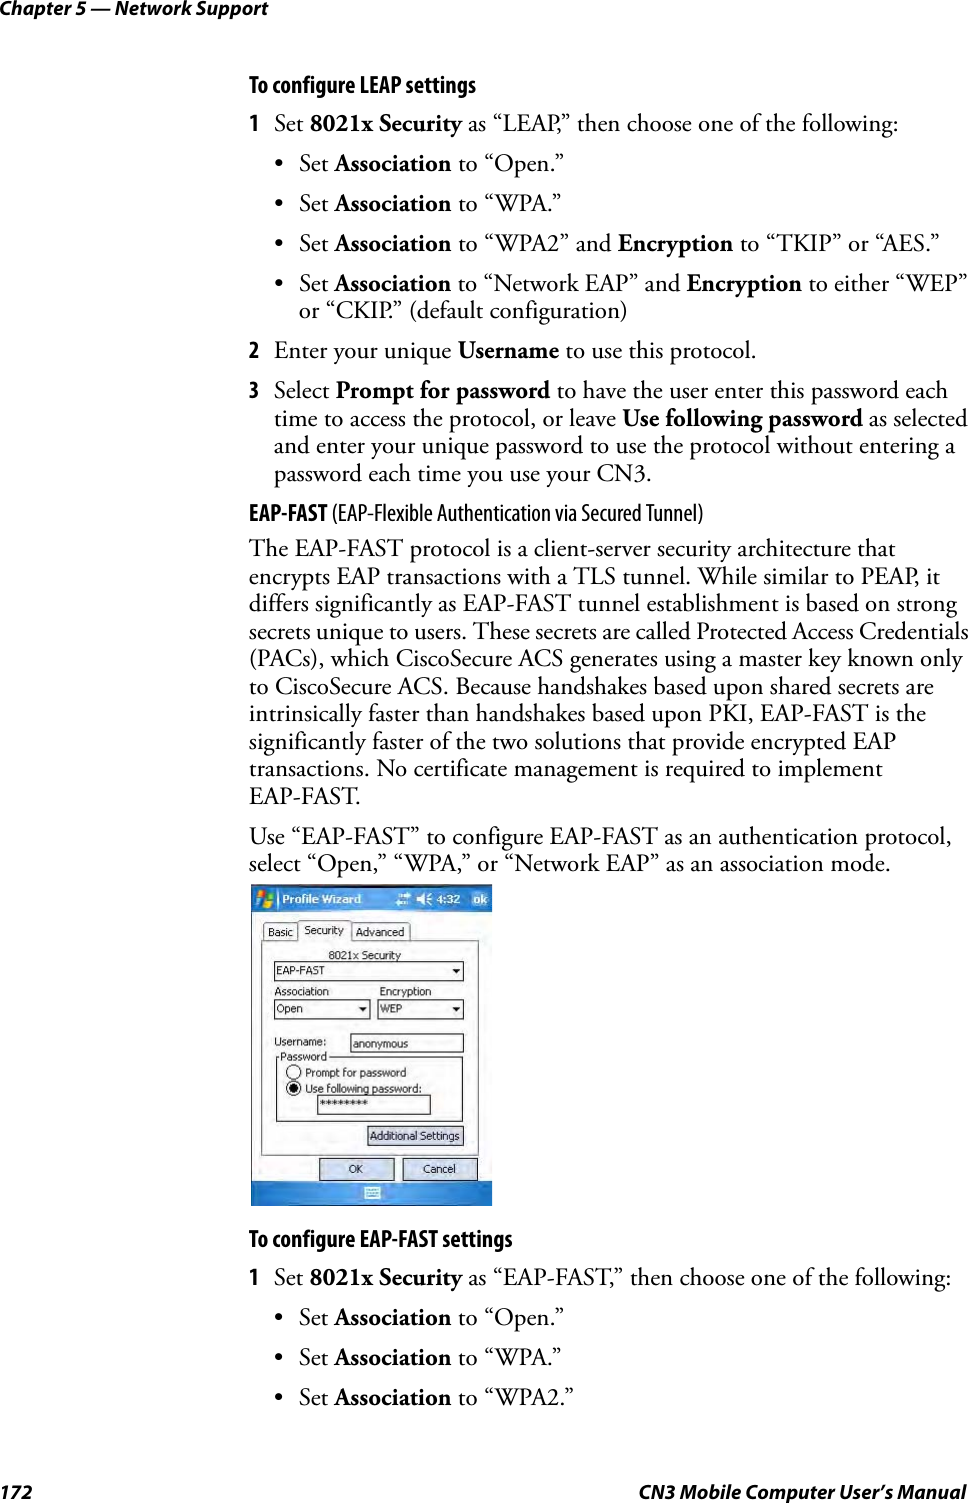 Chapter 5 — Network Support172 CN3 Mobile Computer User’s ManualTo configure LEAP settings1Set 8021x Security as “LEAP,” then choose one of the following:•Set Association to “Open.”•Set Association to “WPA.”•Set Association to “WPA2” and Encryption to “TKIP” or “AES.”•Set Association to “Network EAP” and Encryption to either “WEP” or “CKIP.” (default configuration)2Enter your unique Username to use this protocol.3Select Prompt for password to have the user enter this password each time to access the protocol, or leave Use following password as selected and enter your unique password to use the protocol without entering a password each time you use your CN3.EAP-FAST (EAP-Flexible Authentication via Secured Tunnel)The EAP-FAST protocol is a client-server security architecture that encrypts EAP transactions with a TLS tunnel. While similar to PEAP, it differs significantly as EAP-FAST tunnel establishment is based on strong secrets unique to users. These secrets are called Protected Access Credentials (PACs), which CiscoSecure ACS generates using a master key known only to CiscoSecure ACS. Because handshakes based upon shared secrets are intrinsically faster than handshakes based upon PKI, EAP-FAST is the significantly faster of the two solutions that provide encrypted EAP transactions. No certificate management is required to implement EAP-FAST.Use “EAP-FAST” to configure EAP-FAST as an authentication protocol, select “Open,” “WPA,” or “Network EAP” as an association mode.To configure EAP-FAST settings1Set 8021x Security as “EAP-FAST,” then choose one of the following:•Set Association to “Open.”•Set Association to “WPA.”•Set Association to “WPA2.”